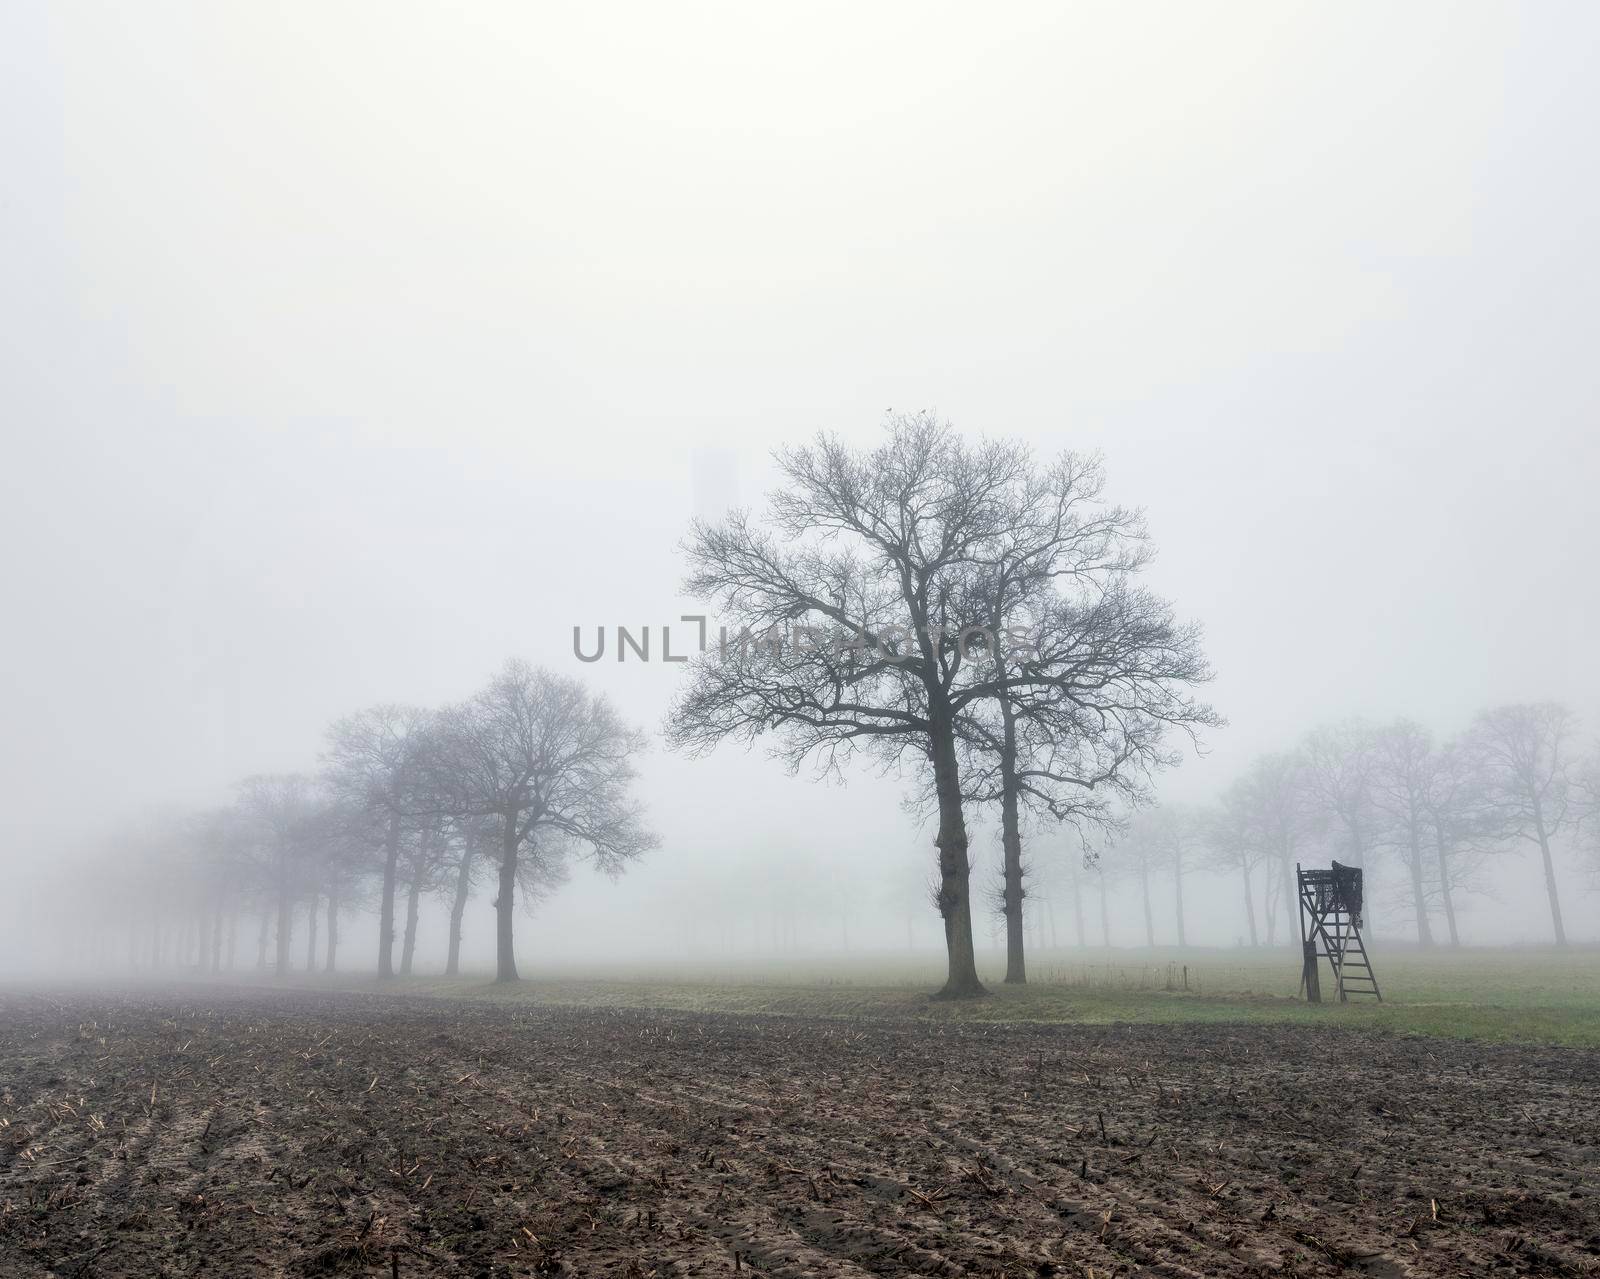 high seat for hunting in green winter field near utrecht in the netherlands on misty winter day by ahavelaar